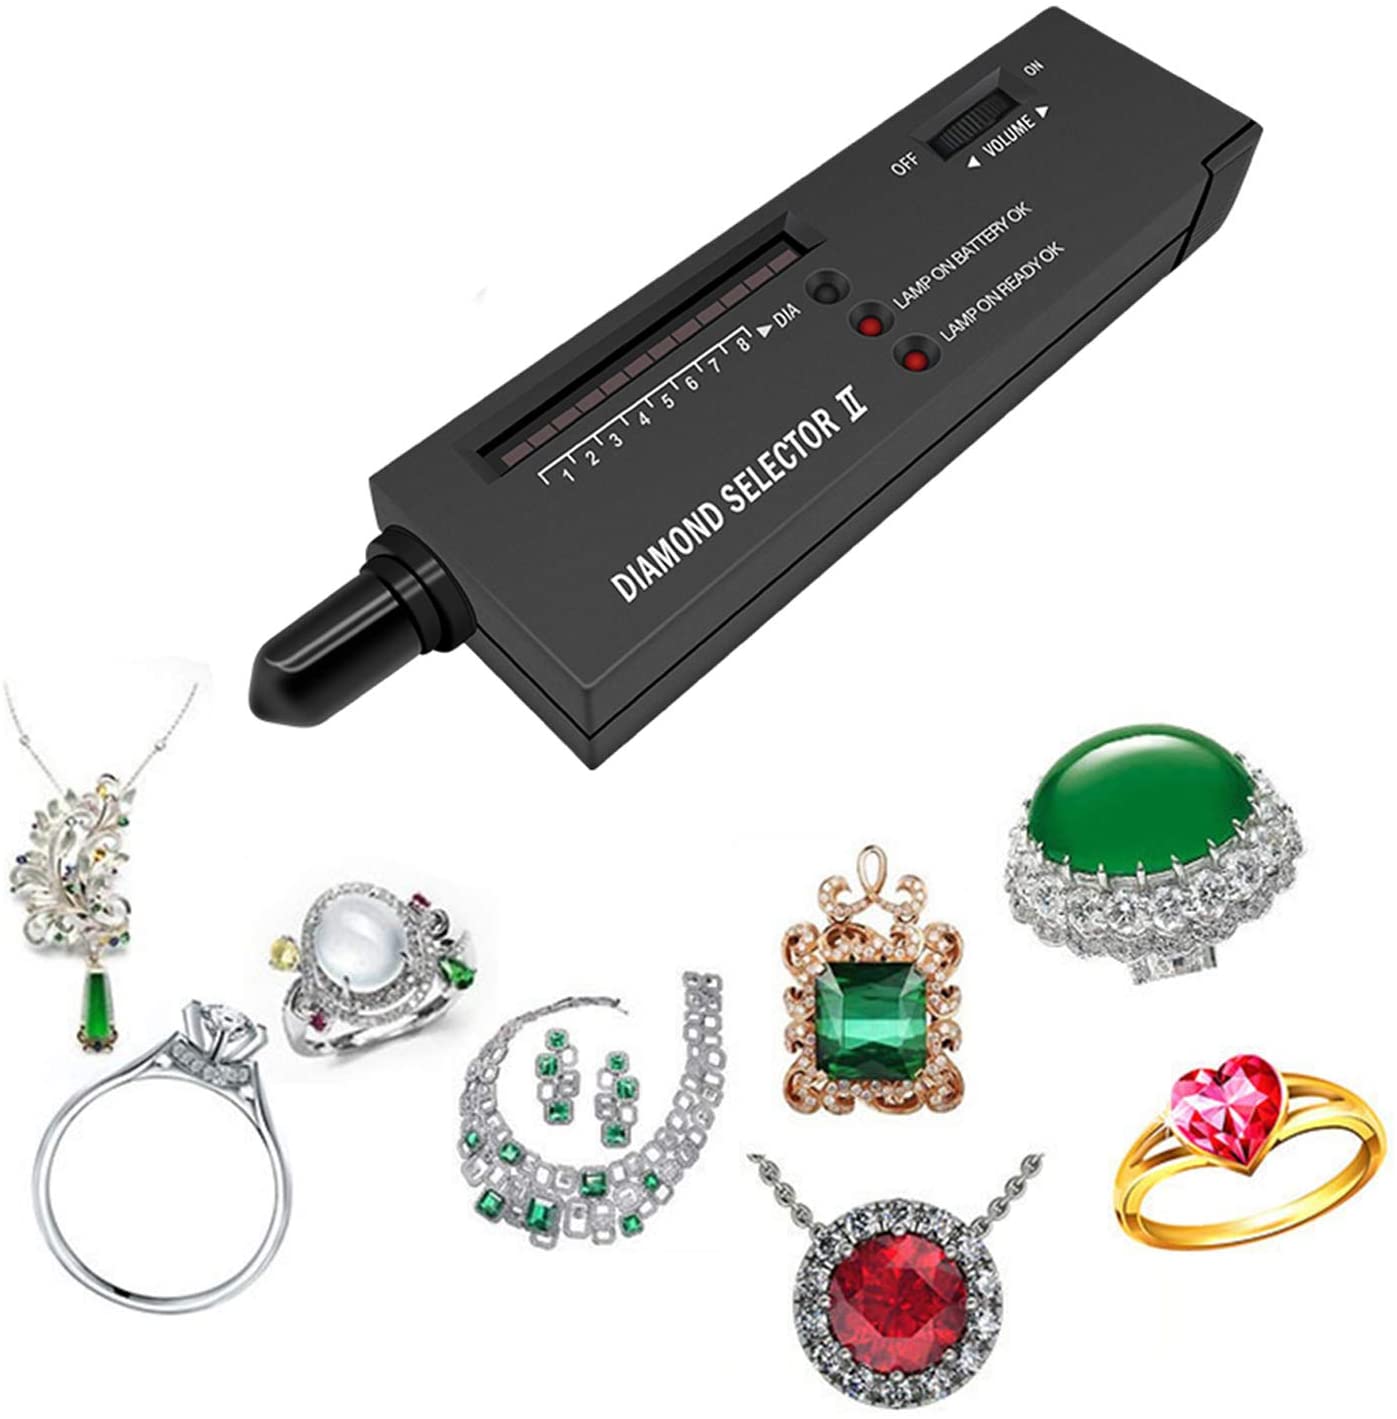 Diamond Tester Pen High Accuracy Diamond Selector Detector Gemstone Jewelry  Testing Tool with Case for Novice Expert 